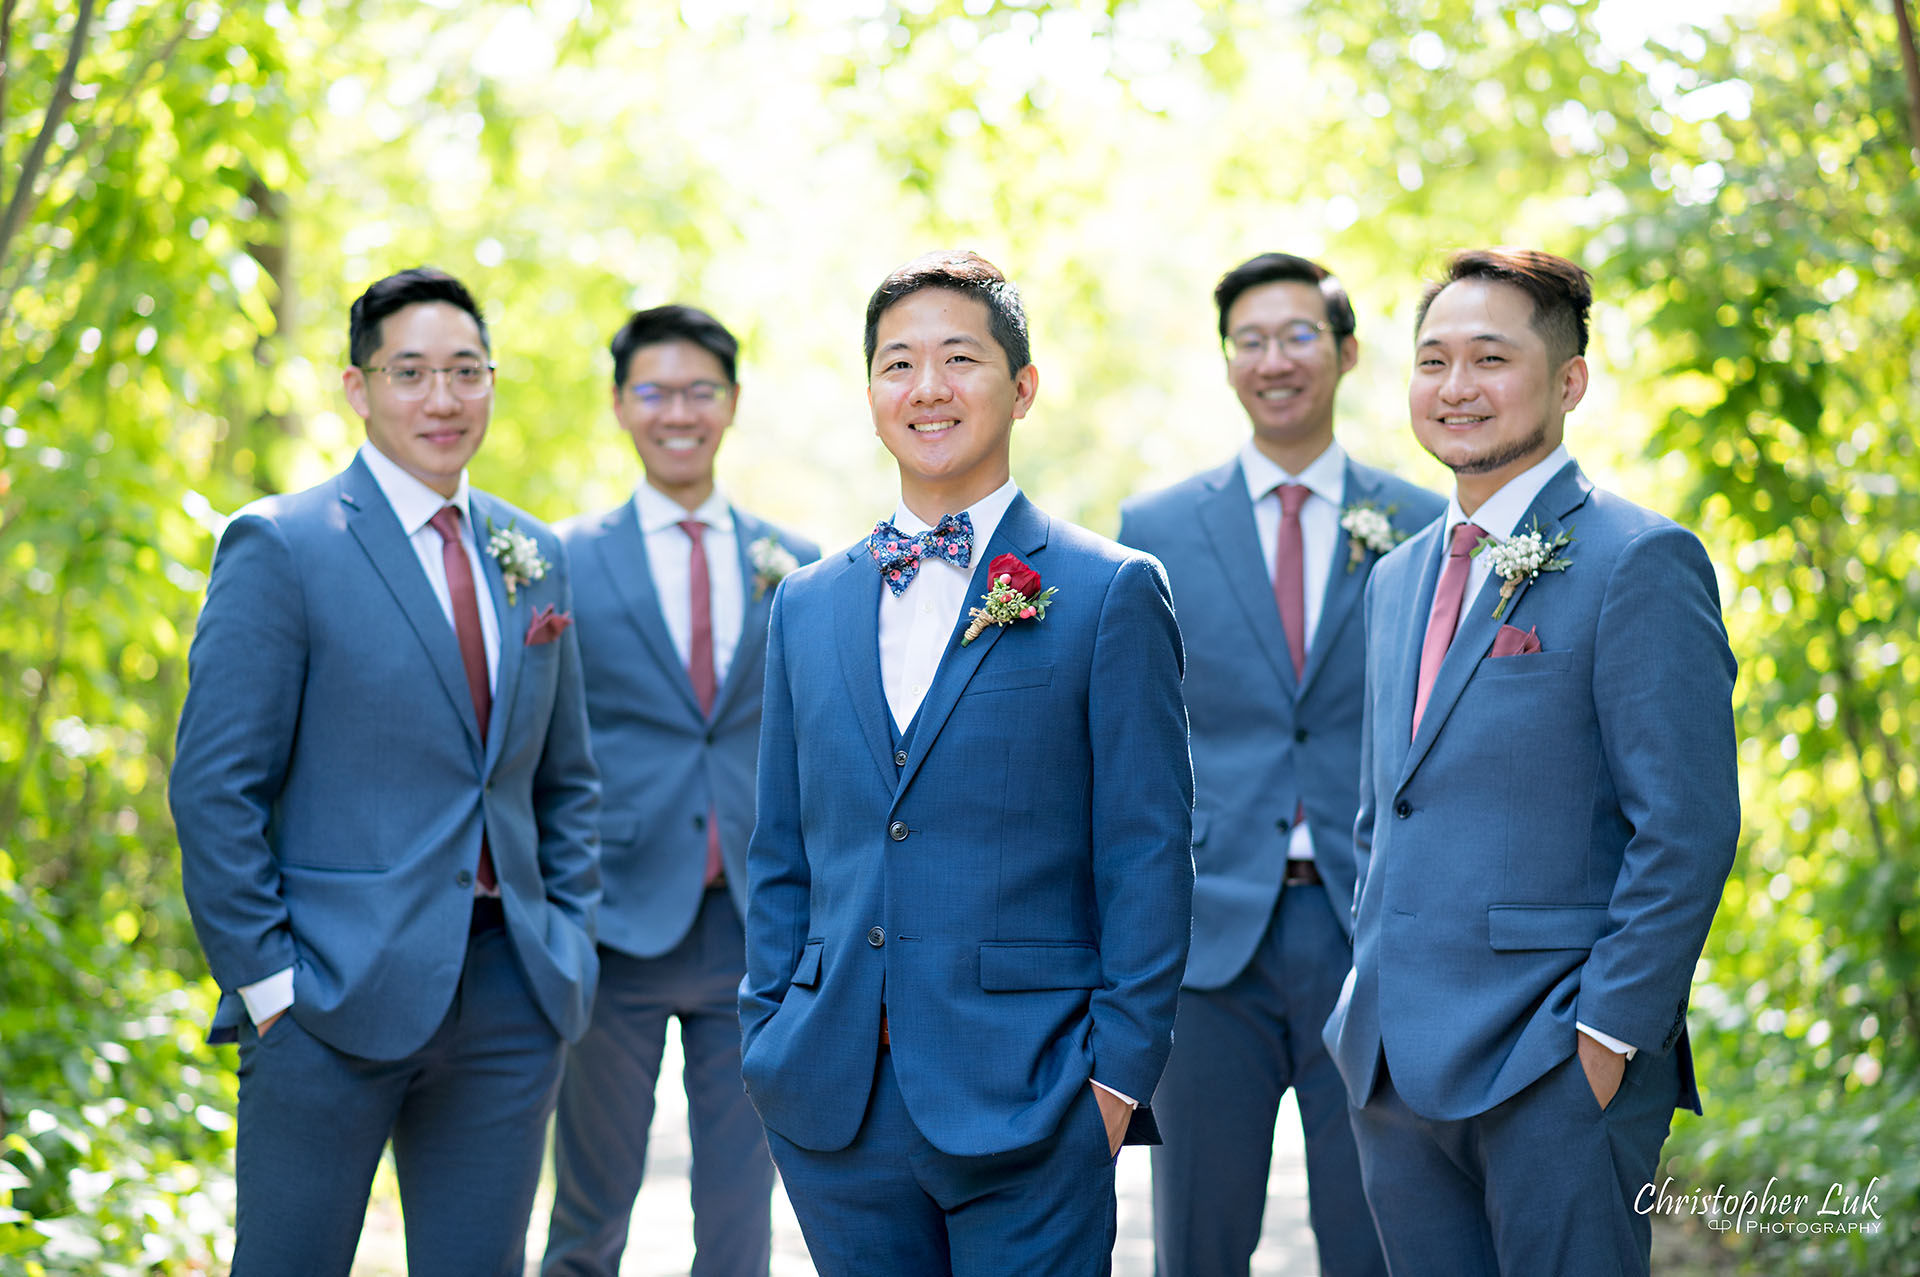 Christopher Luk Toronto Wedding Photographer Bridle Trail Baptist Church Unionville Main Street Crystal Fountain Event Venue Bride Groom Natural Photojournalistic Candid Creative Portrait Session Pictures Forest Best Man Groomsmen Stylish Boy Band Smile